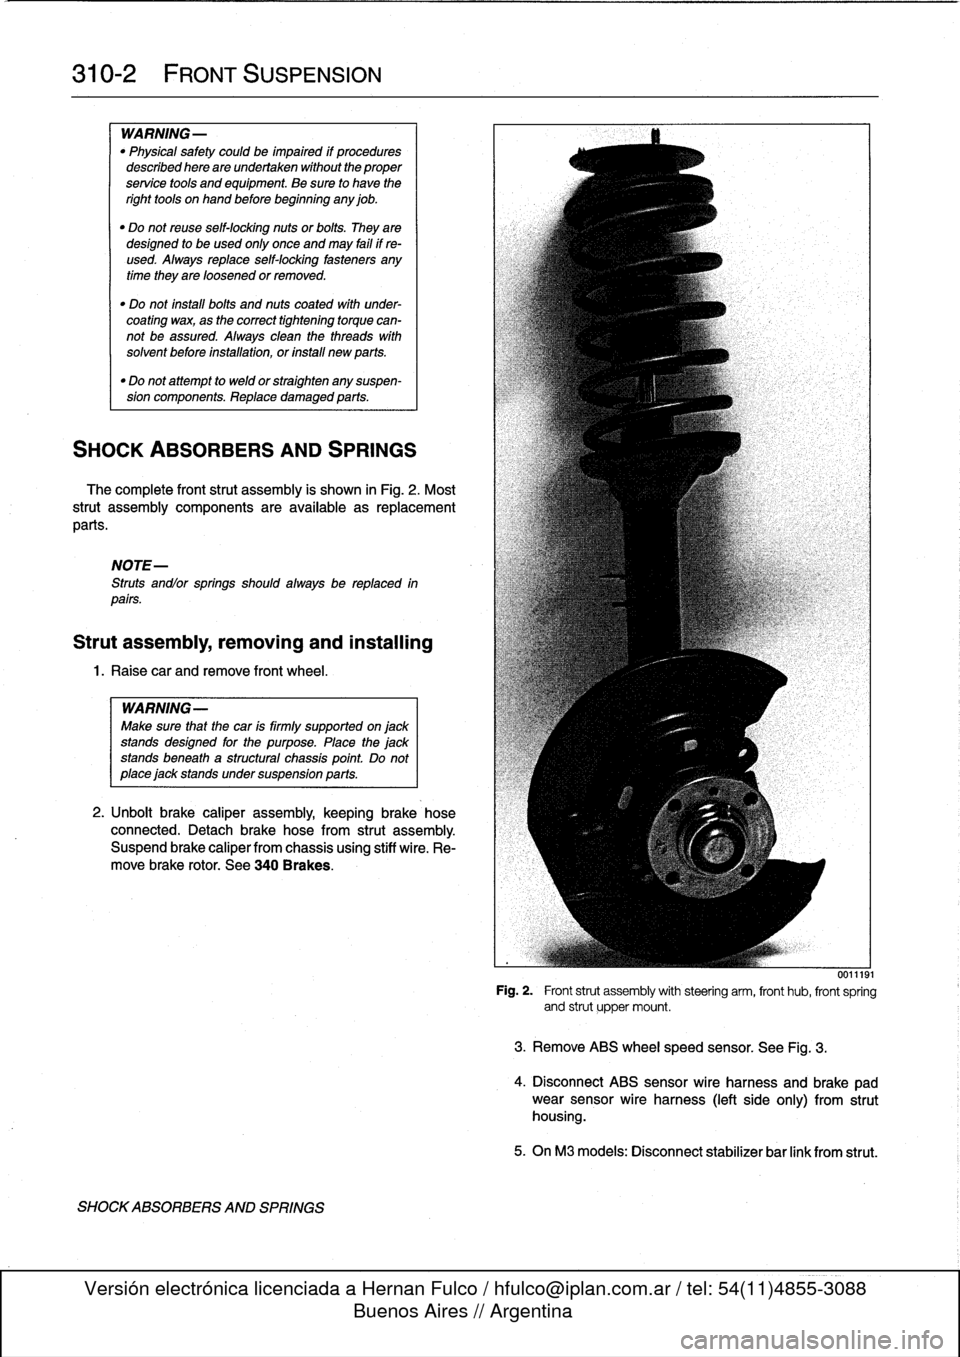 BMW 323i 1995 E36 User Guide 
310-2

	

FRONT
SUSPENSION

WARNING-

"
Physical
safety
could
be
impaired
if
procedures
described
here
areundertaken
without
the
proper
service
tools
and
equipment
.
Be
sure
to
have
the
right
tools
o